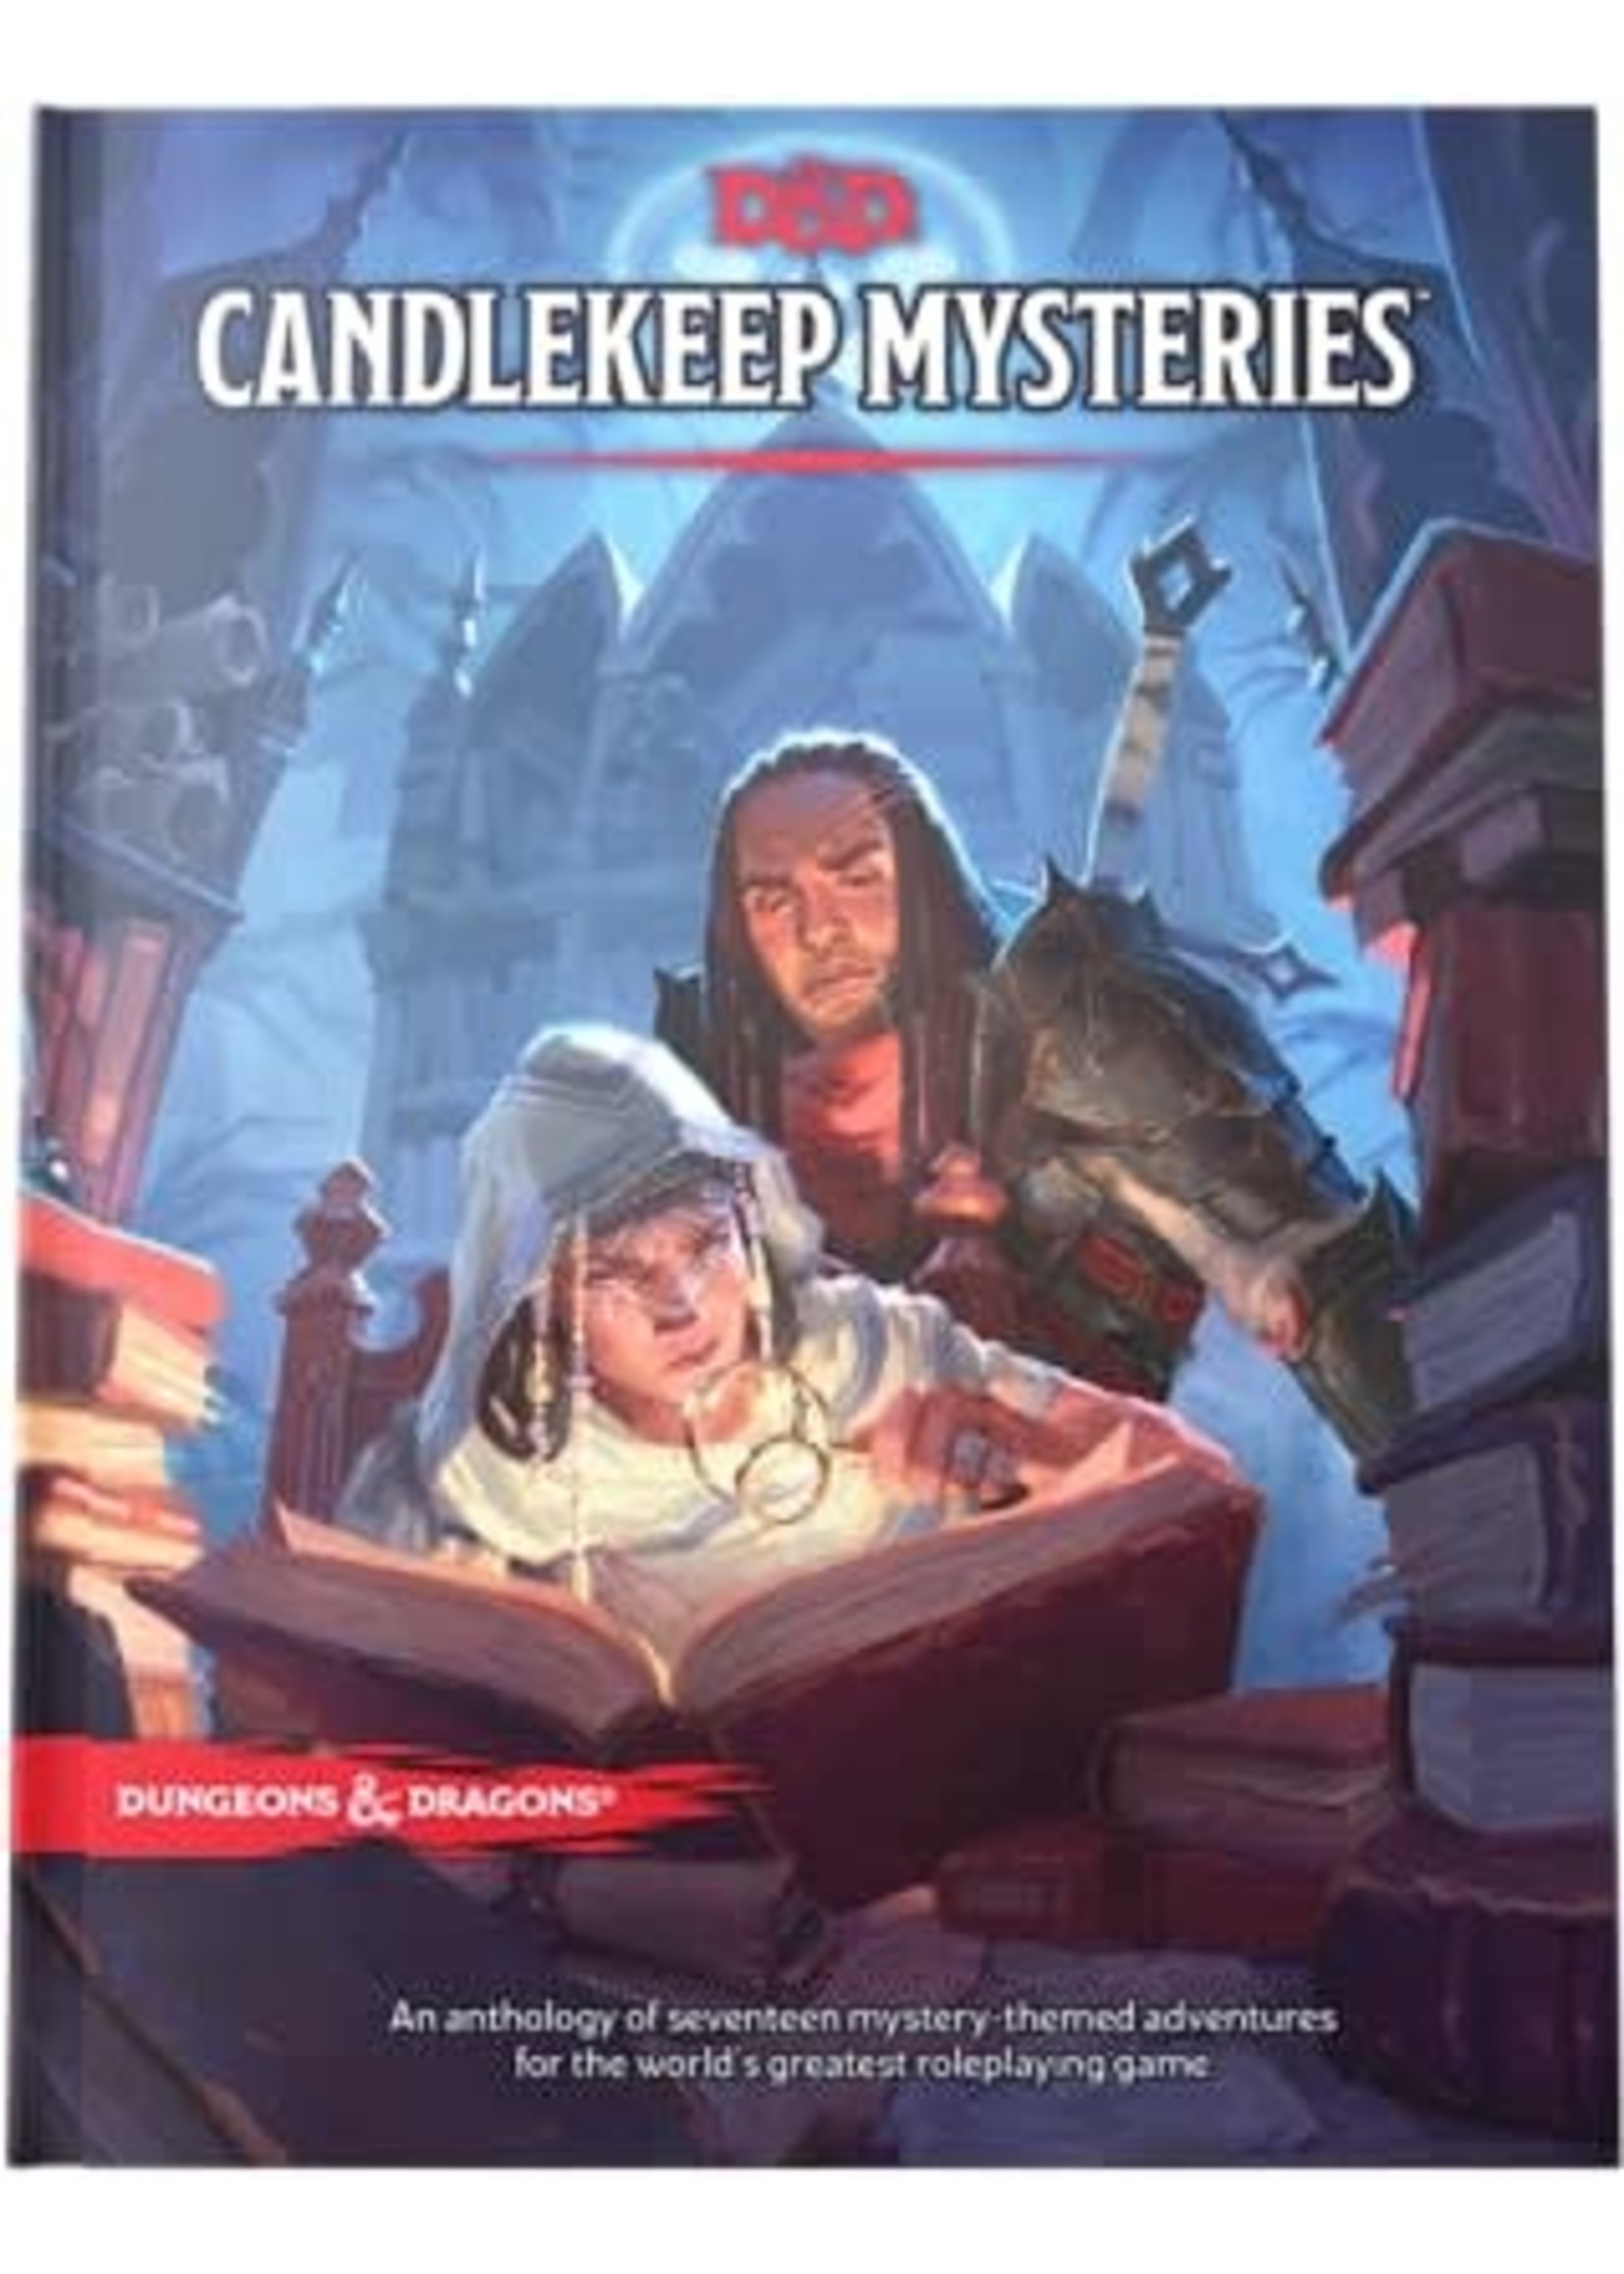 Candlekeep Mysteries (Dungeons & Dragons, 5th Edition) by WotC